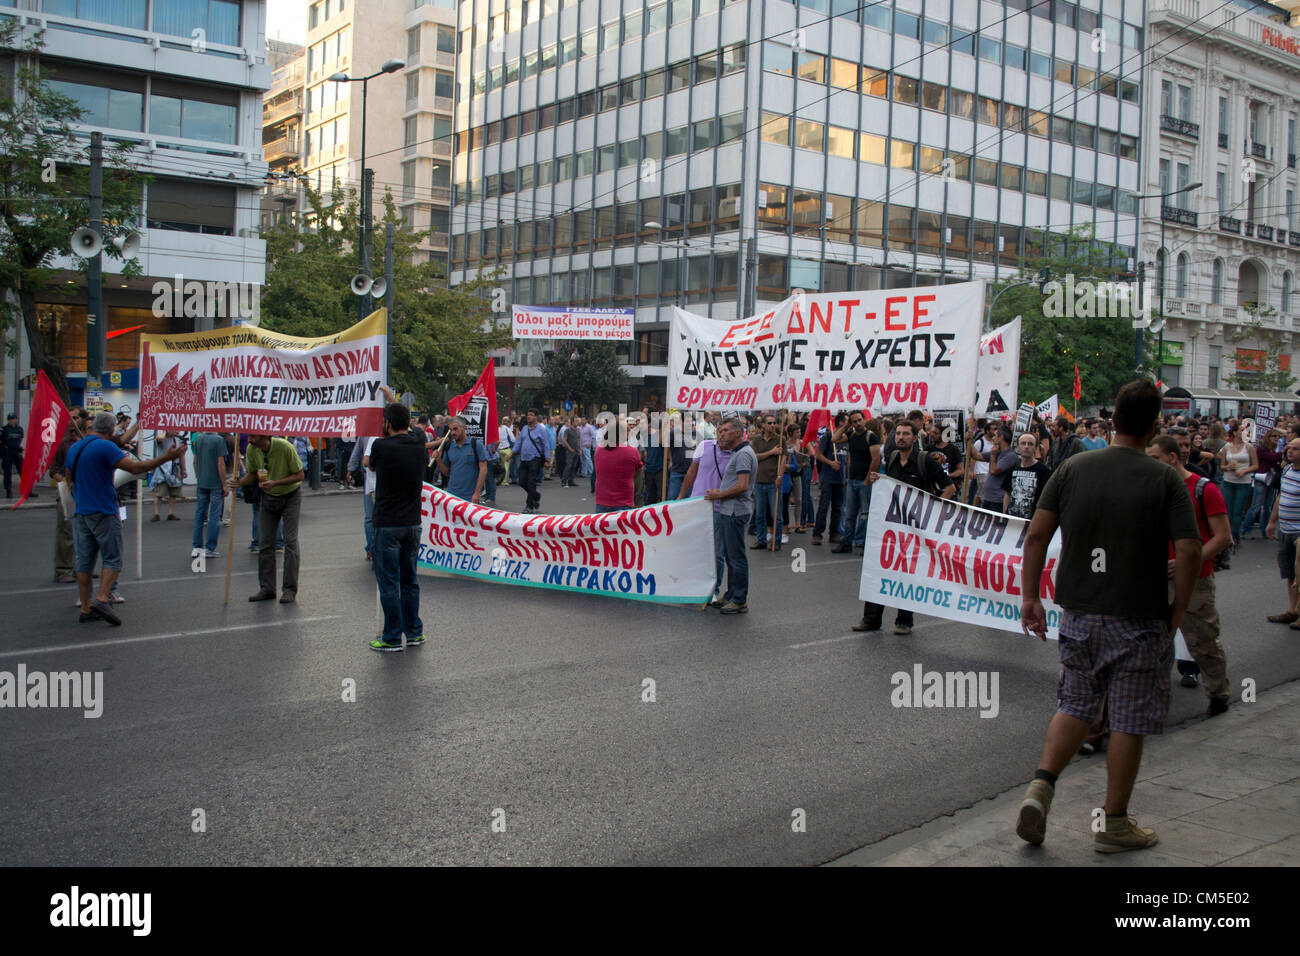 Athens, Greece, 8th October 2012. Public and Private sector unions demonstrate in front of the Greek Parliament. Protesters held banners and shouted slogans against the upcoming privatizations, austerity package and A. Merkel's visit to Greece. Credit:  Nikolas Georgiou / Alamy Live News Stock Photo